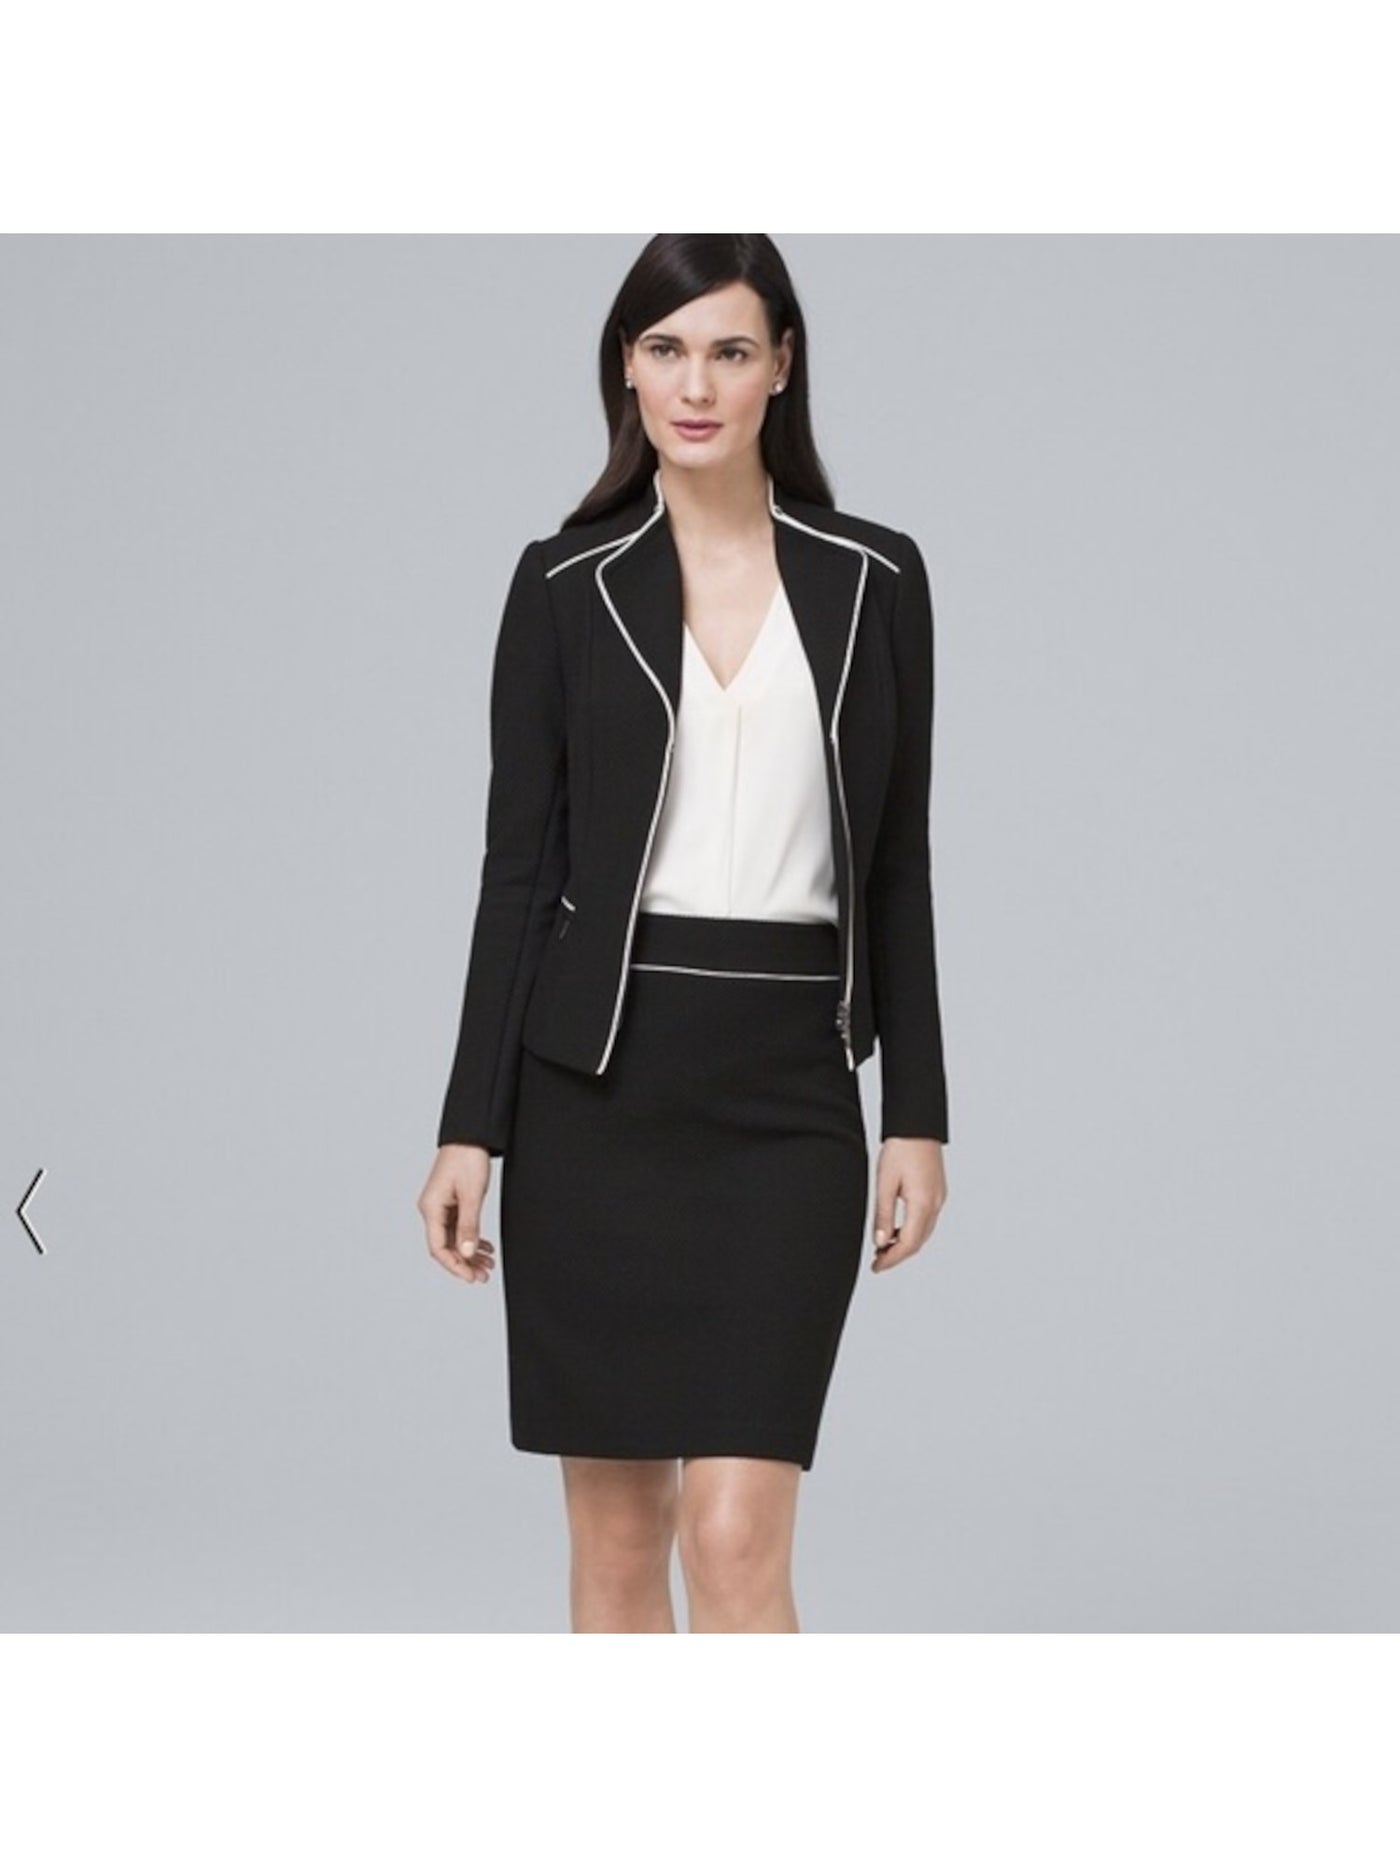 WHITE HOUSE BLACK MARKET Womens Black Textured Pocketed Two-way Zipper Lined Wear To Work Suit Jacket 0